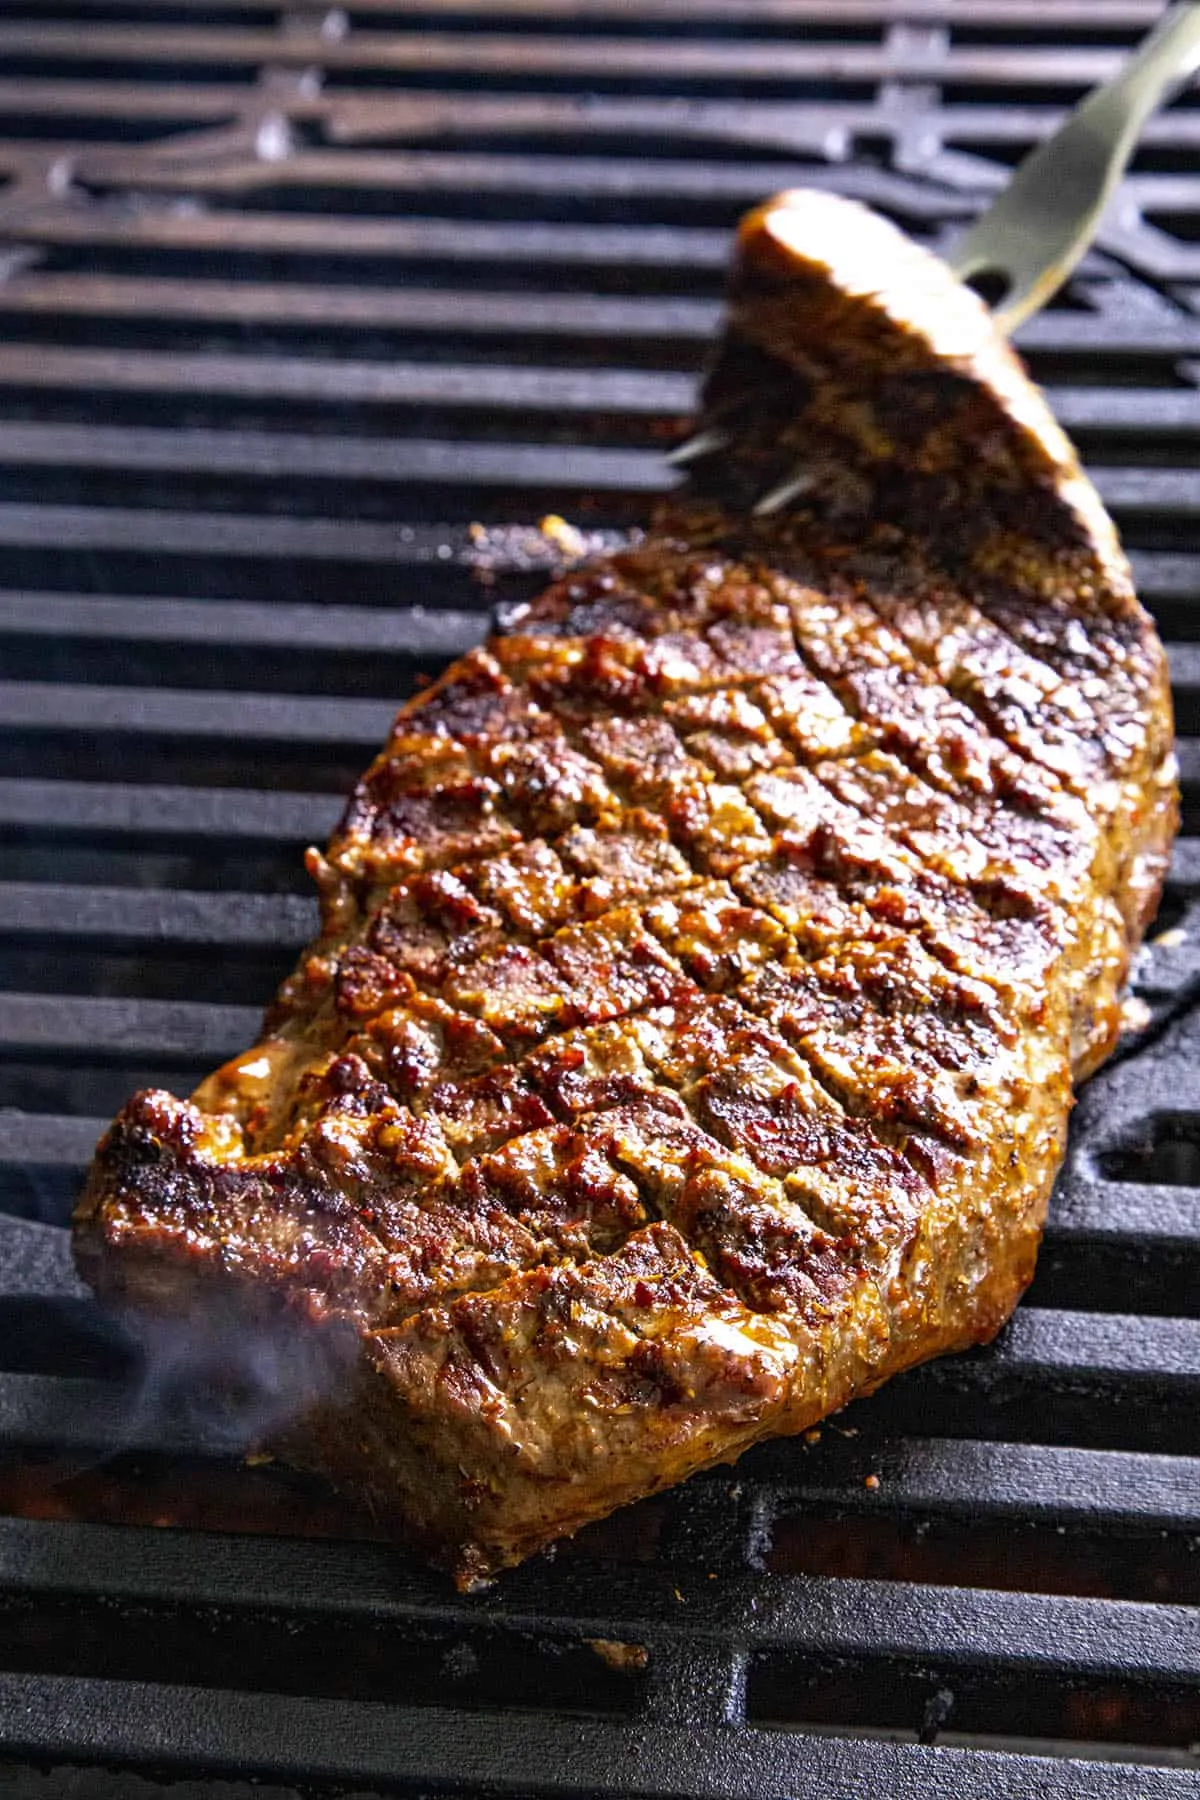 Flipping a London broil steak on the grill